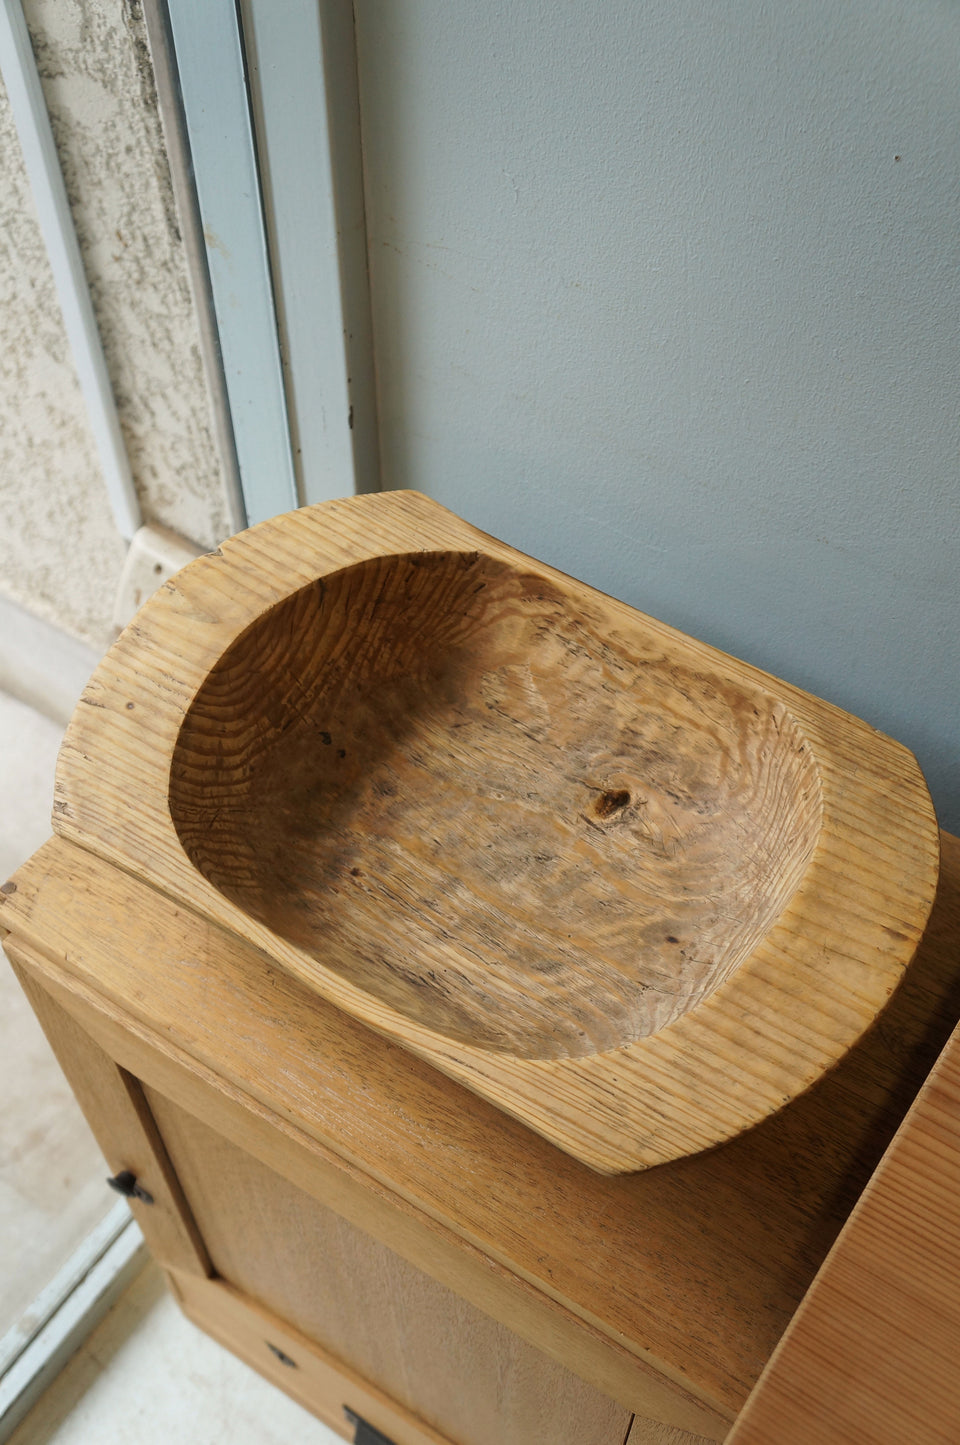 [2]Wooden Bowl